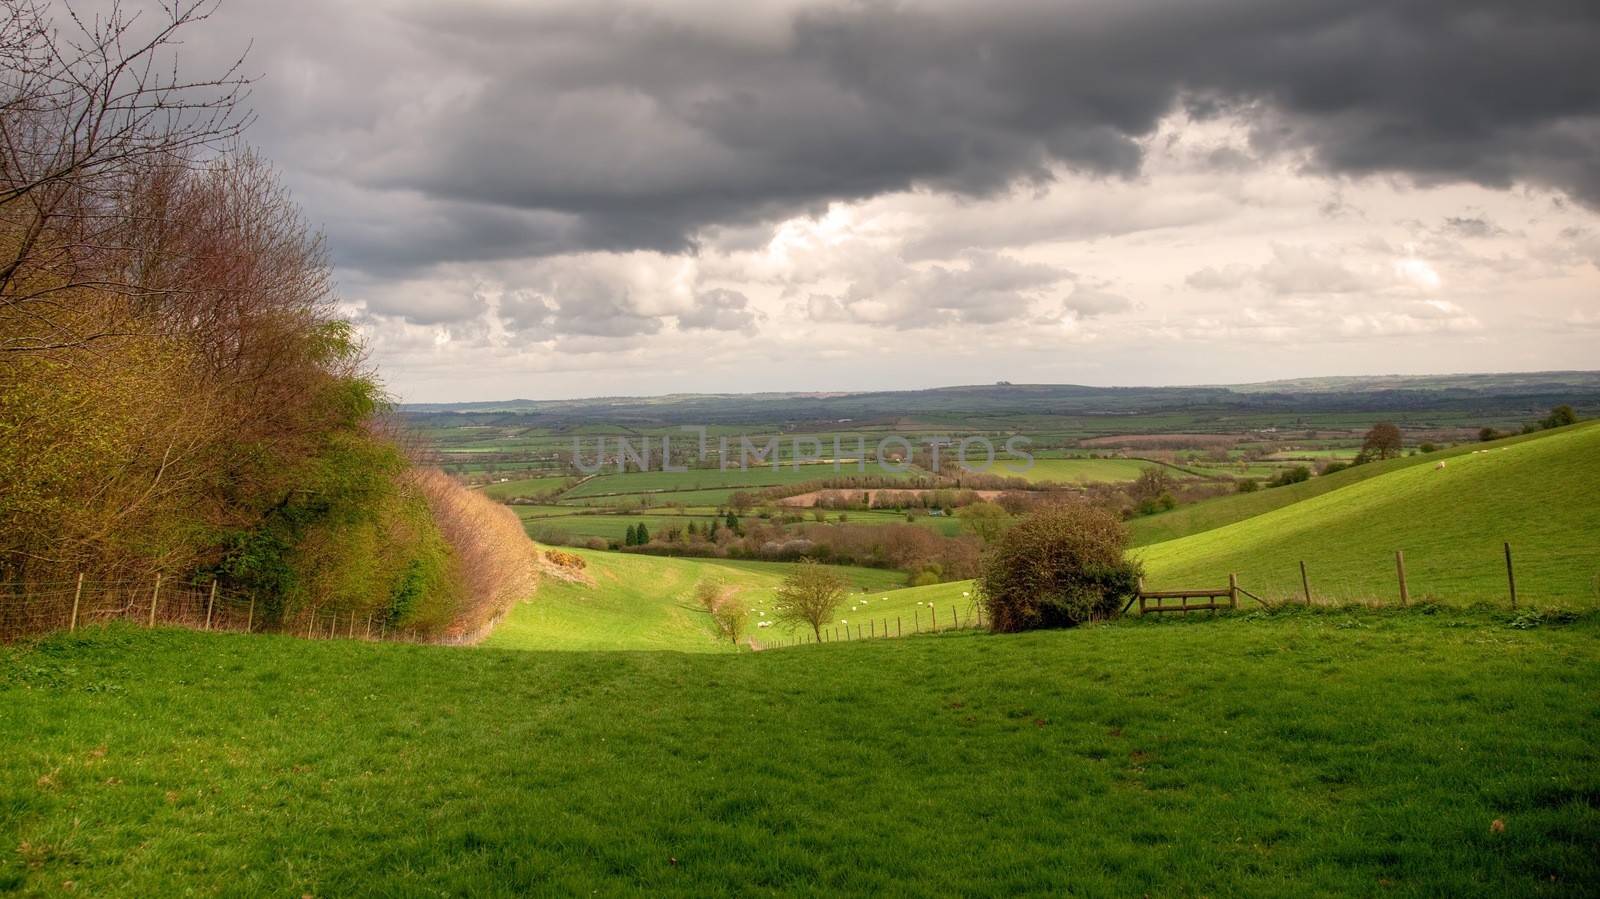 View near the Warwickshire village of Ilmington, Cotswolds, England.